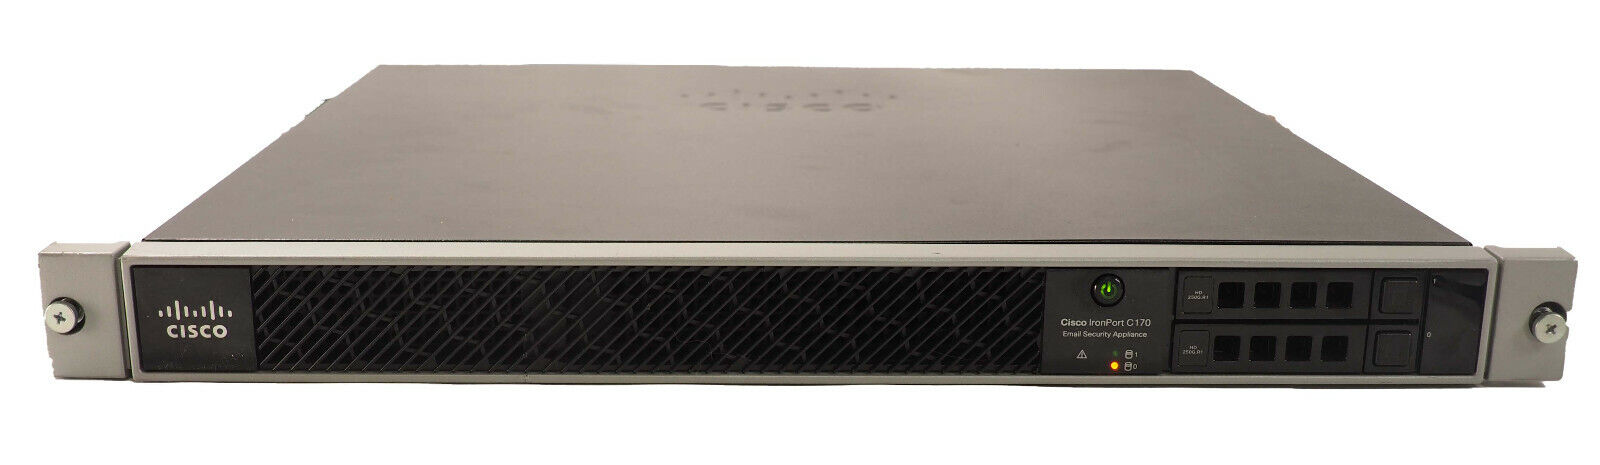 CISCO IRONPORT C170 V02 EMAIL SECURITY APPLIANCE/ 2X 250GB HDD INCLUDED 